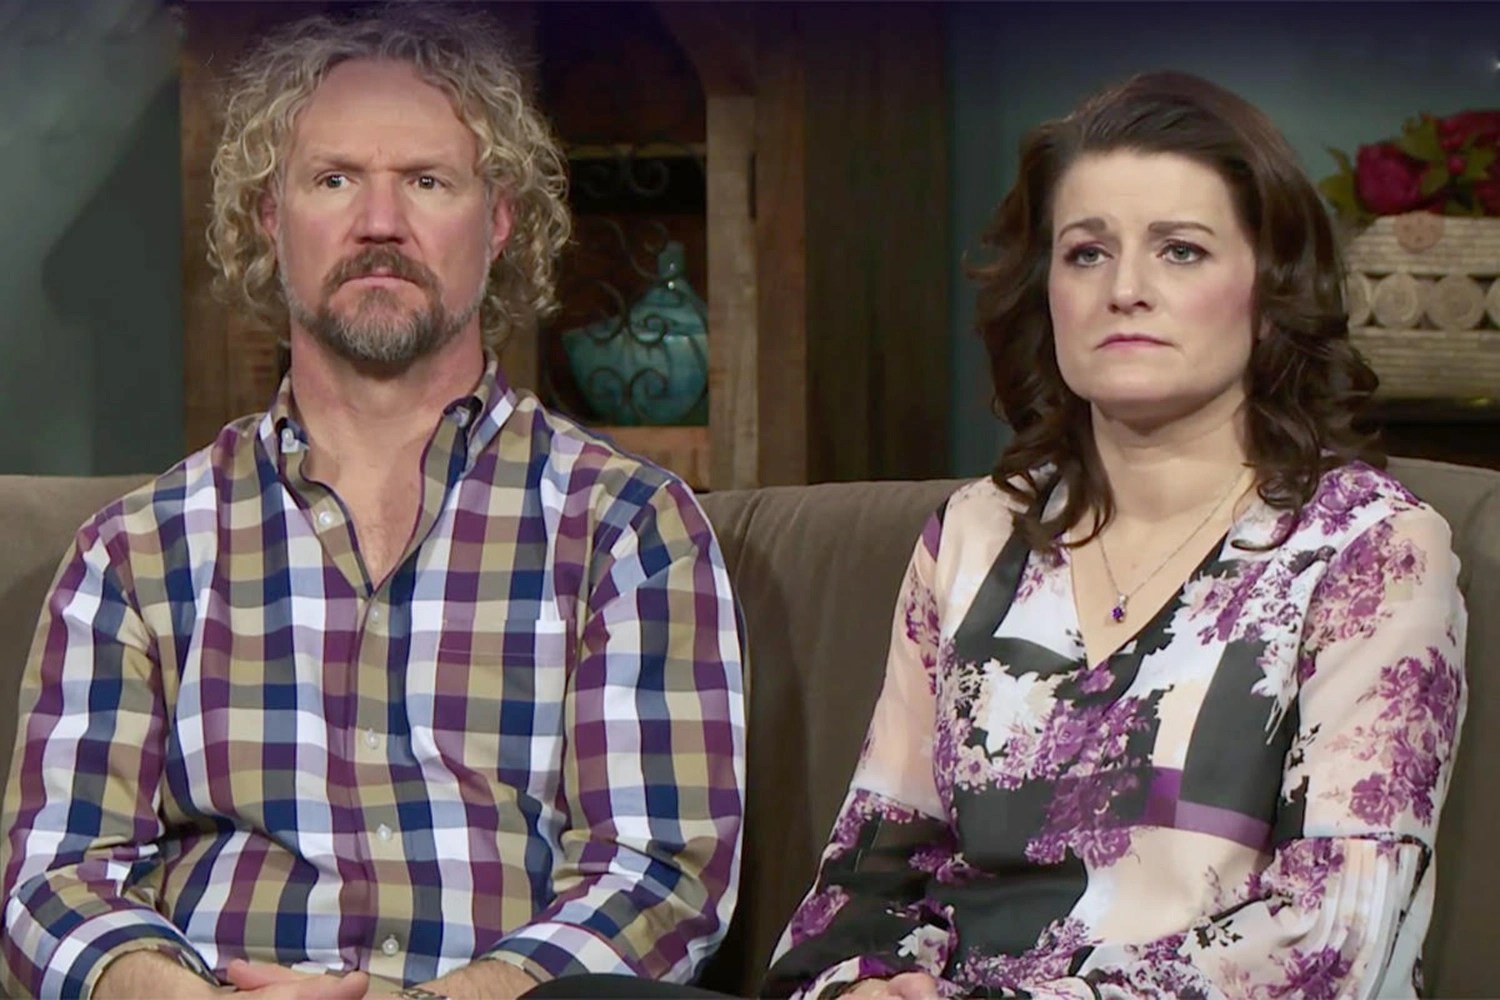 Kody Brown and Robyn Brown sitting on a couch for a ‘Sister Wives’ interview on TLC.